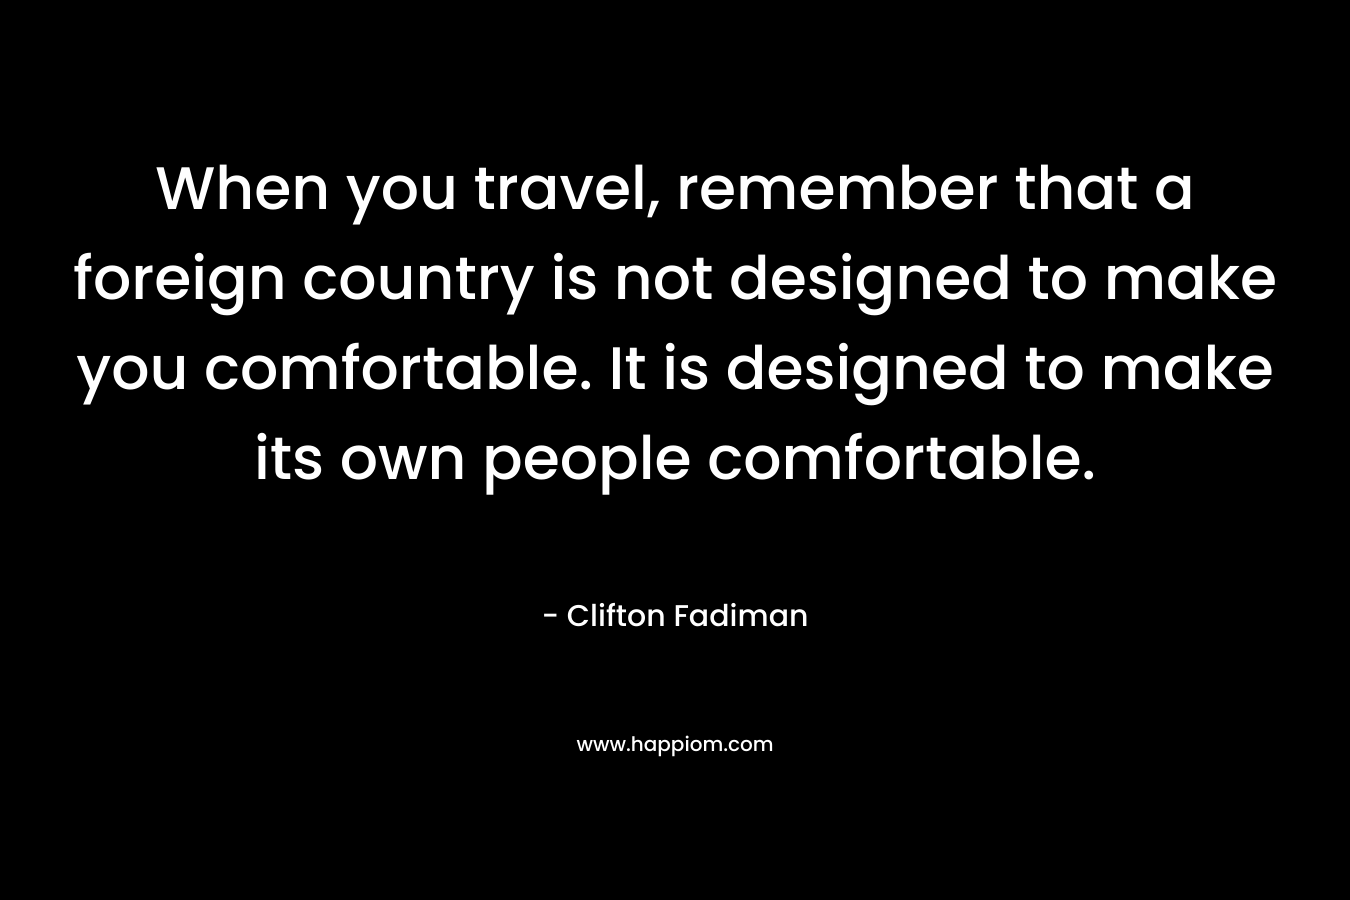 When you travel, remember that a foreign country is not designed to make you comfortable. It is designed to make its own people comfortable.